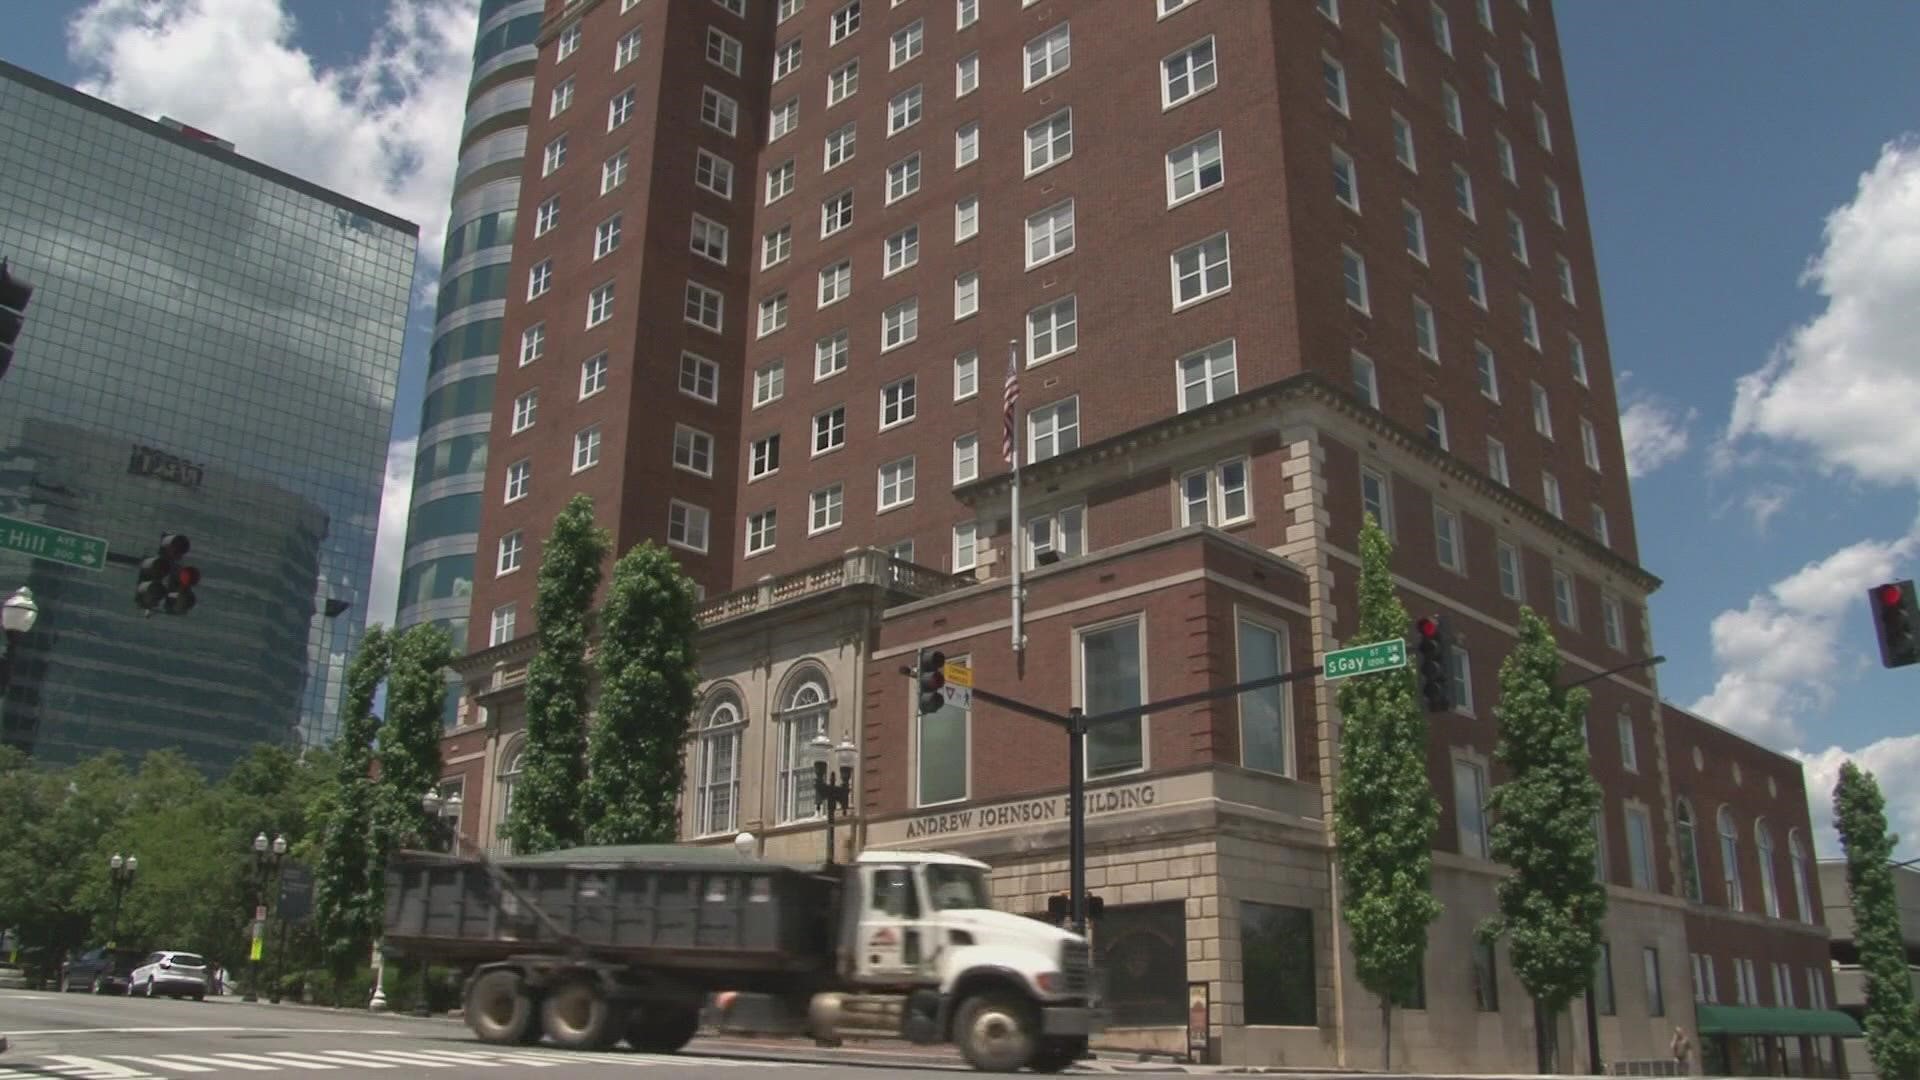 The Knox County Commission approved changes to the PILOT agreement with developers to turn the Andrew Johnson Building into a hotel.